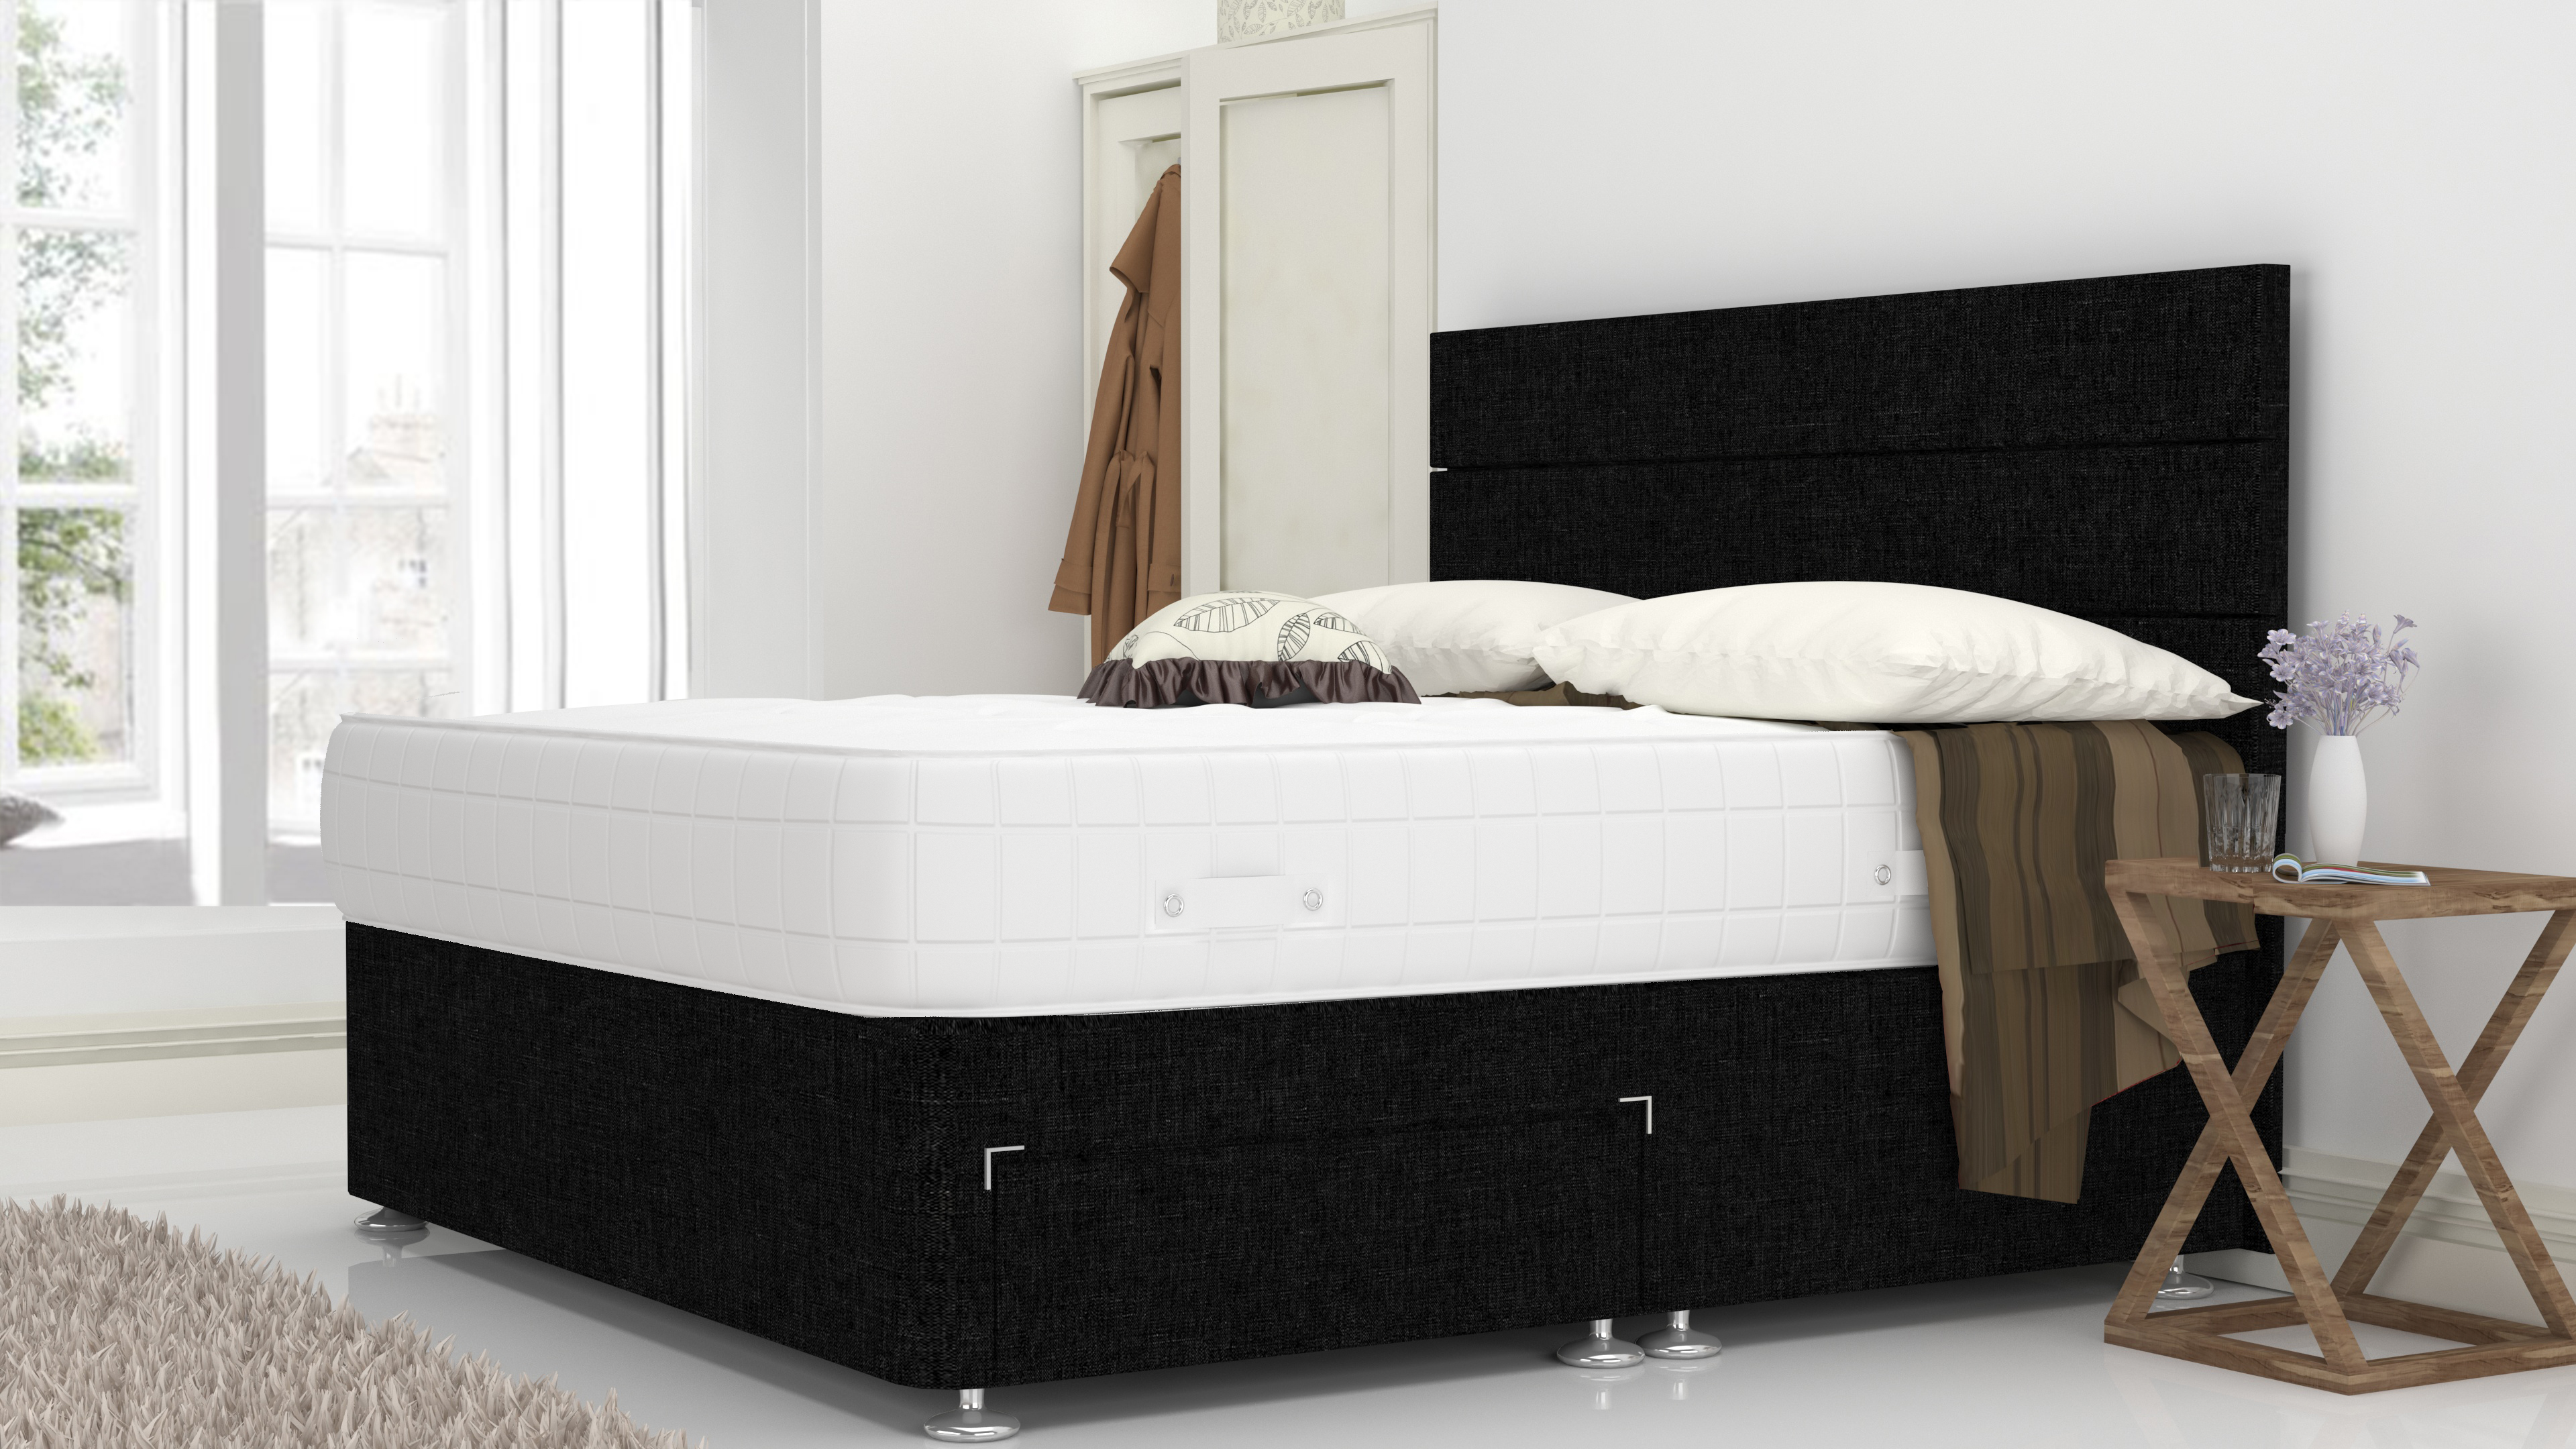 Black Venice 6 Feet Divan Bed Set With 3 Panel Headboard (Included Feet) And Free Pocket Sprung Mattress